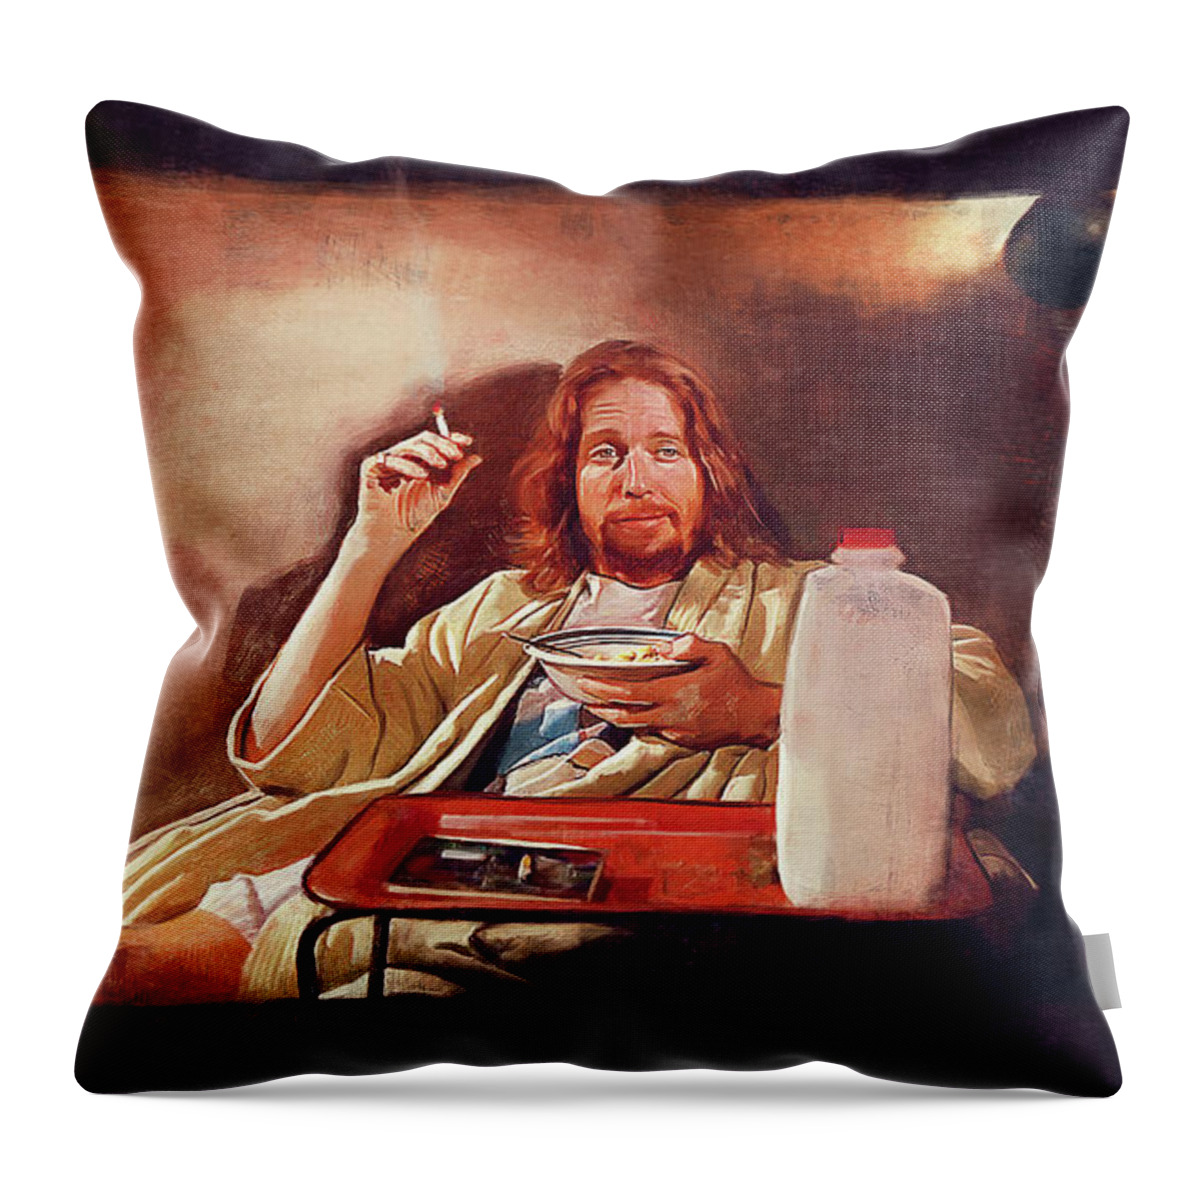 Pulp Throw Pillow featuring the painting The Dude - Lance - Pulp Fiction by Joseph Oland